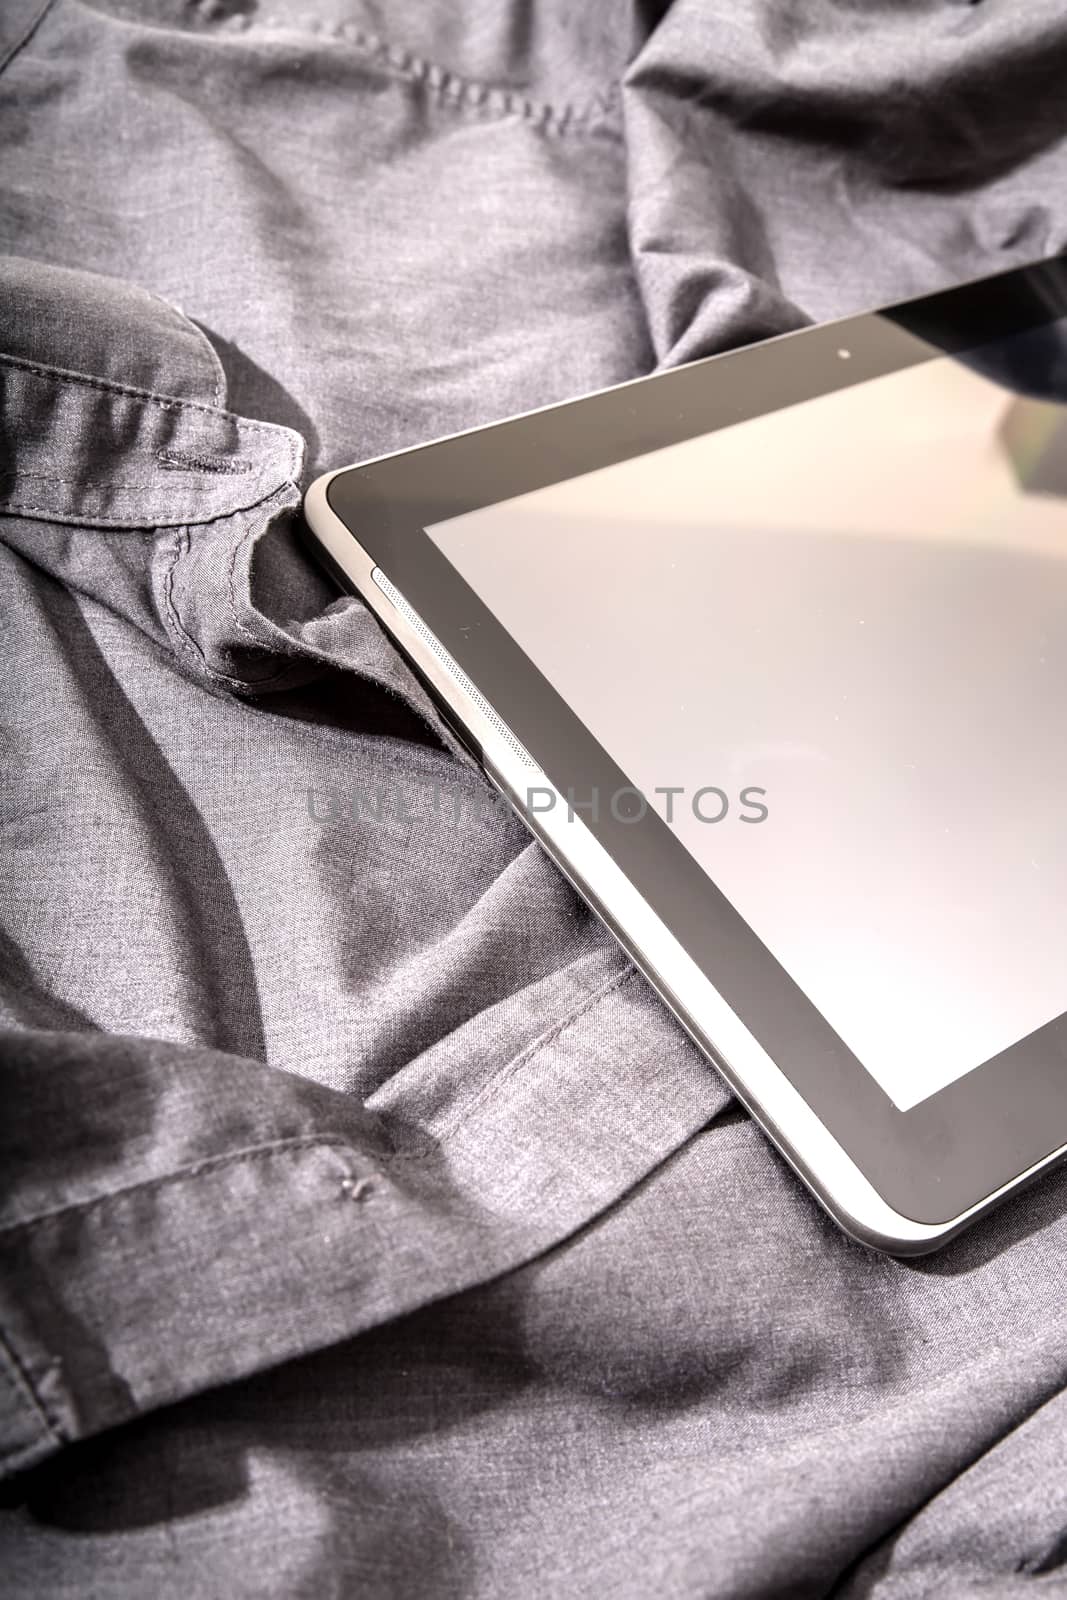 A Tablet PC on some dark cloth.